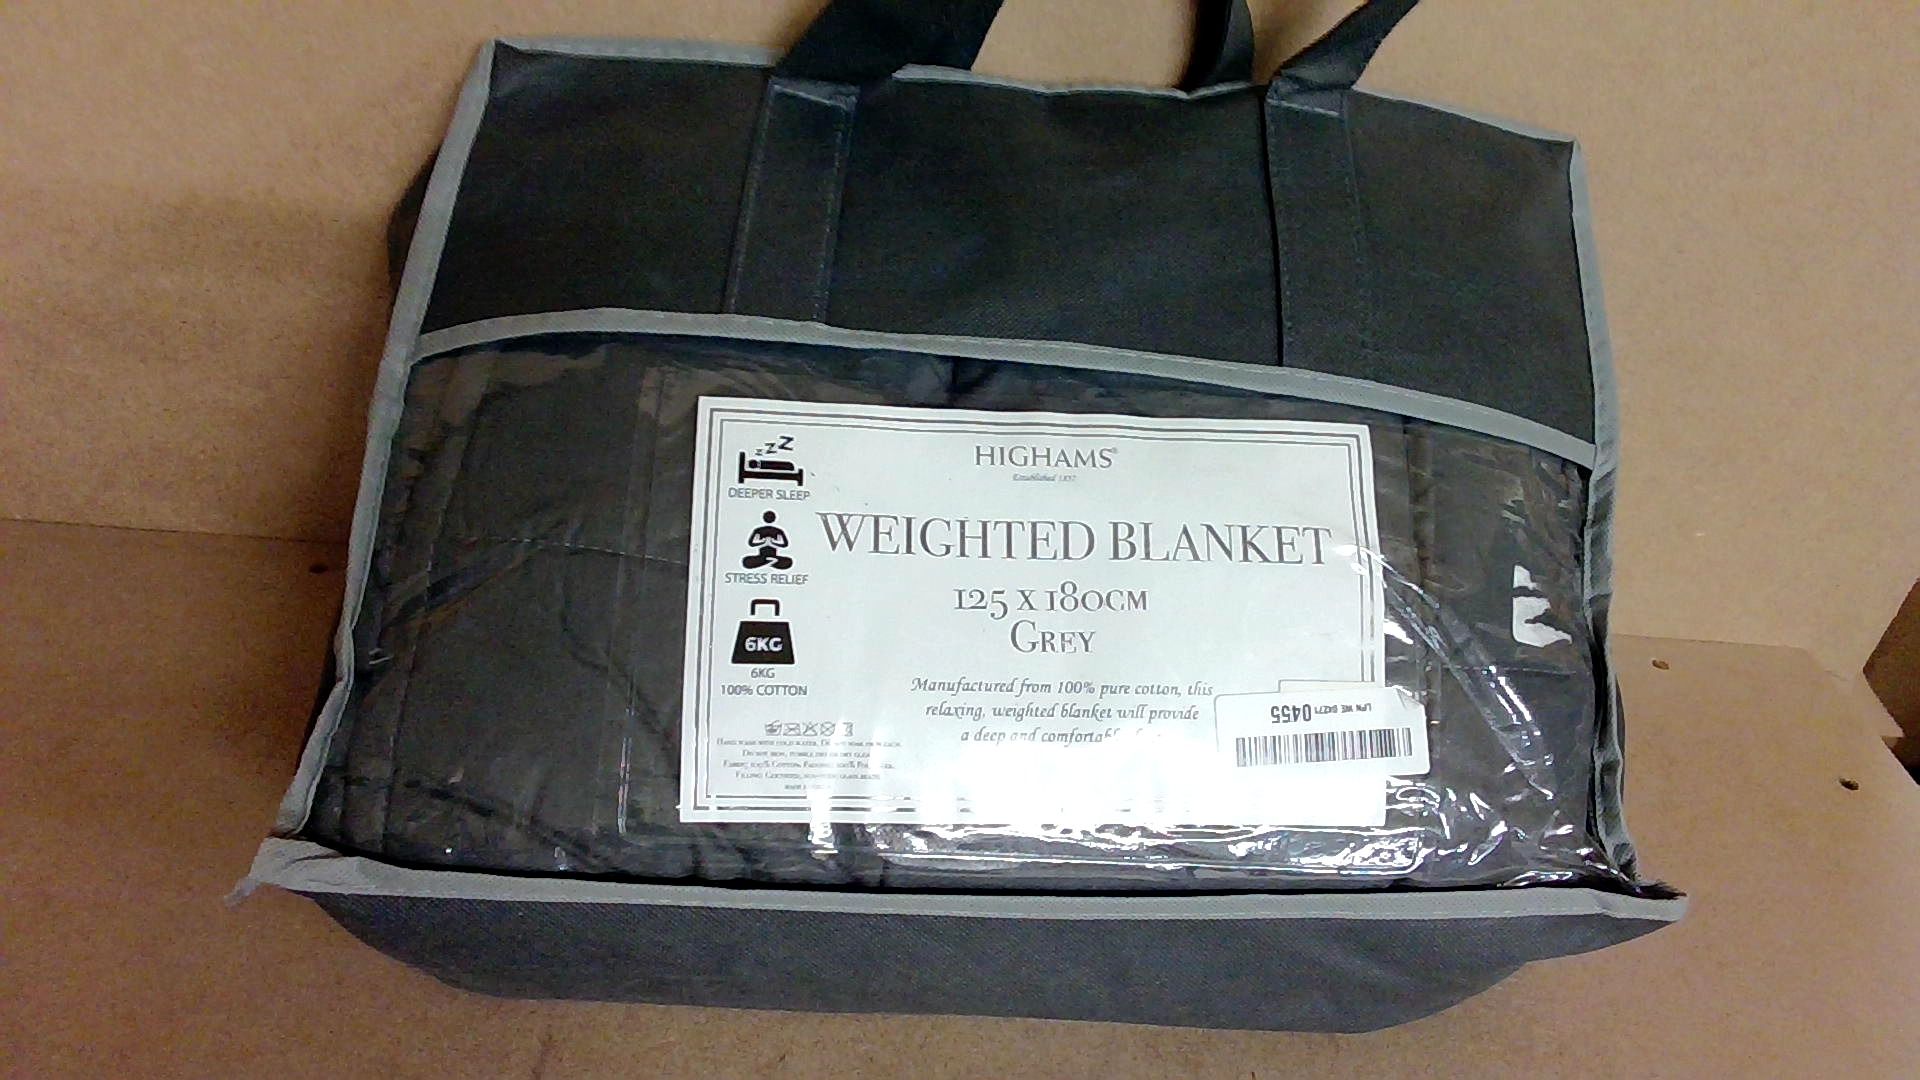 HIGHAM'S weighted blanket